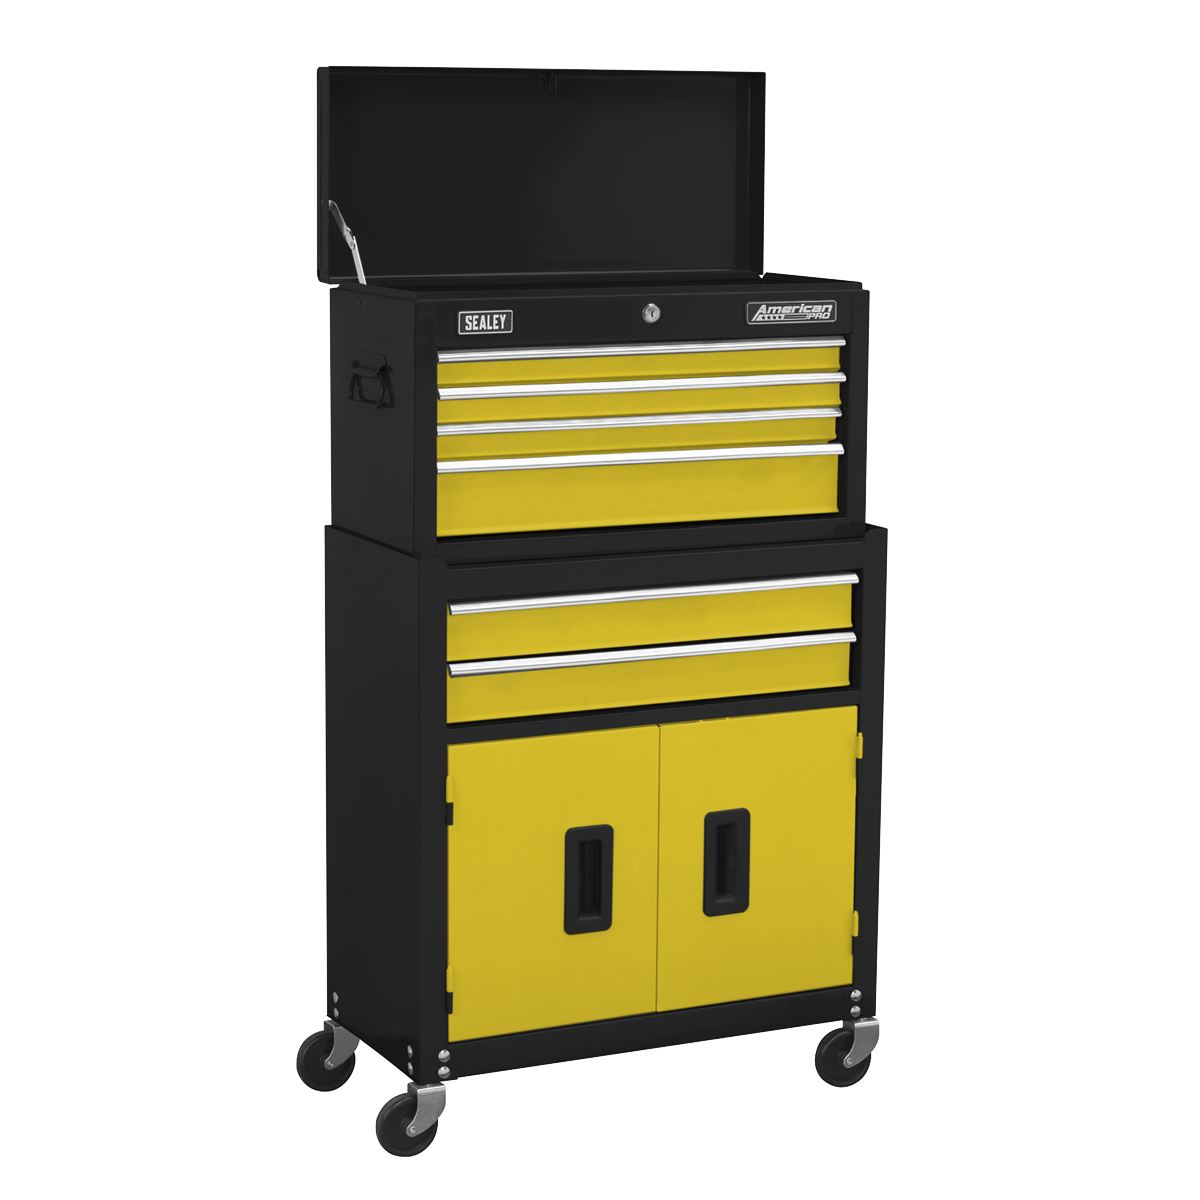 Sealey American Pro Topchest & Rollcab Combination 6 Drawer with Ball-Bearing Slides -Yellow